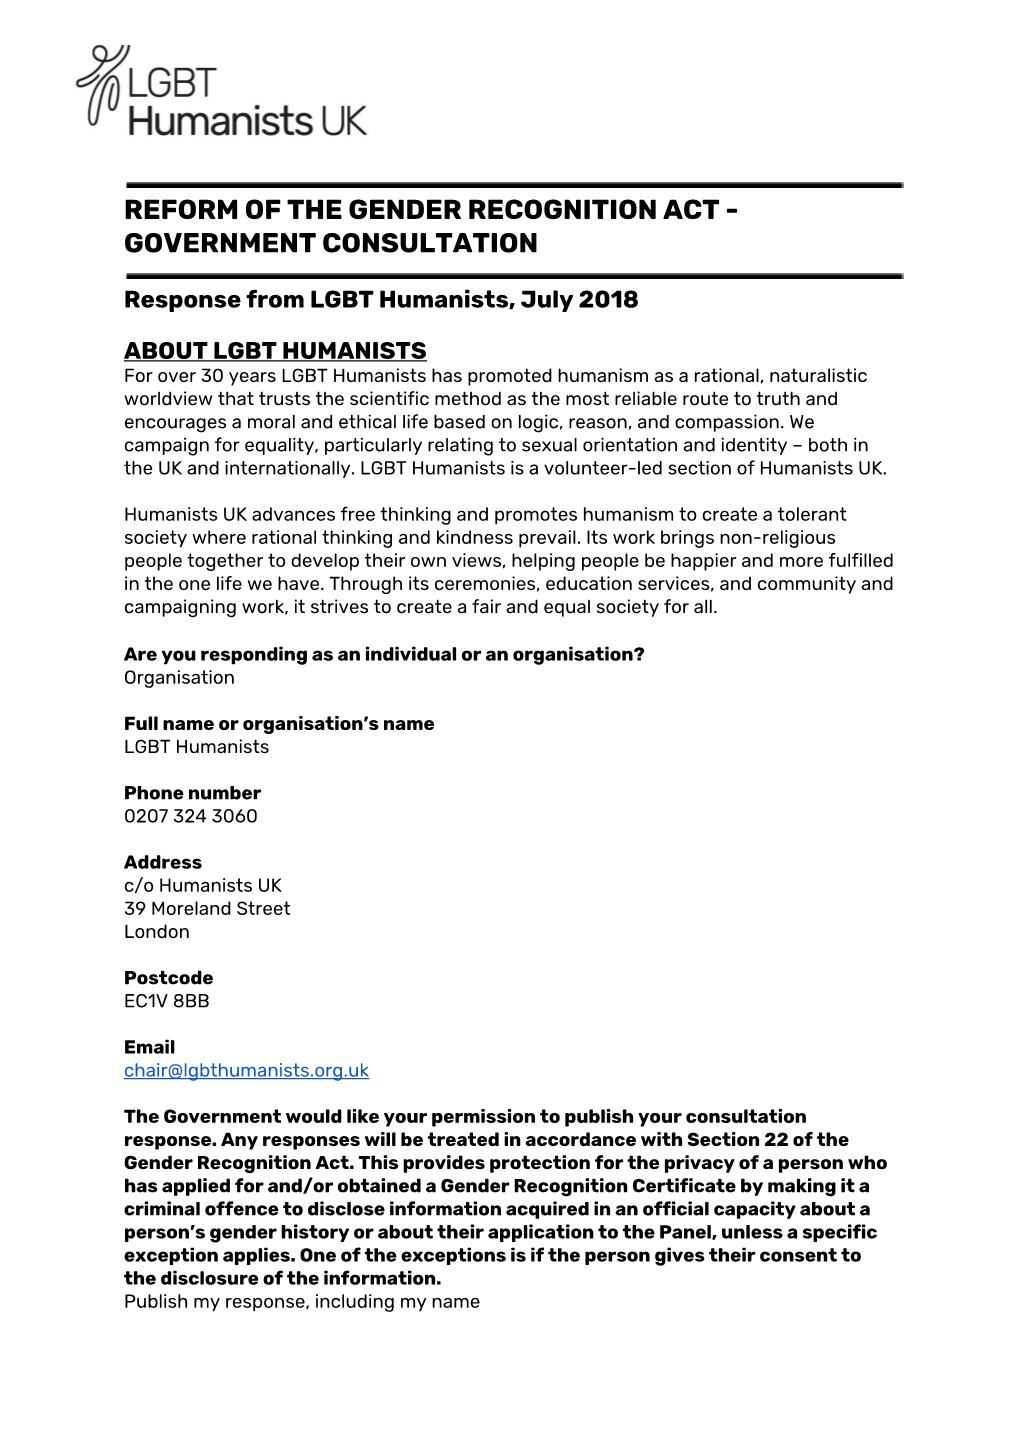 Reform of the Gender Recognition Act - Government Consultation